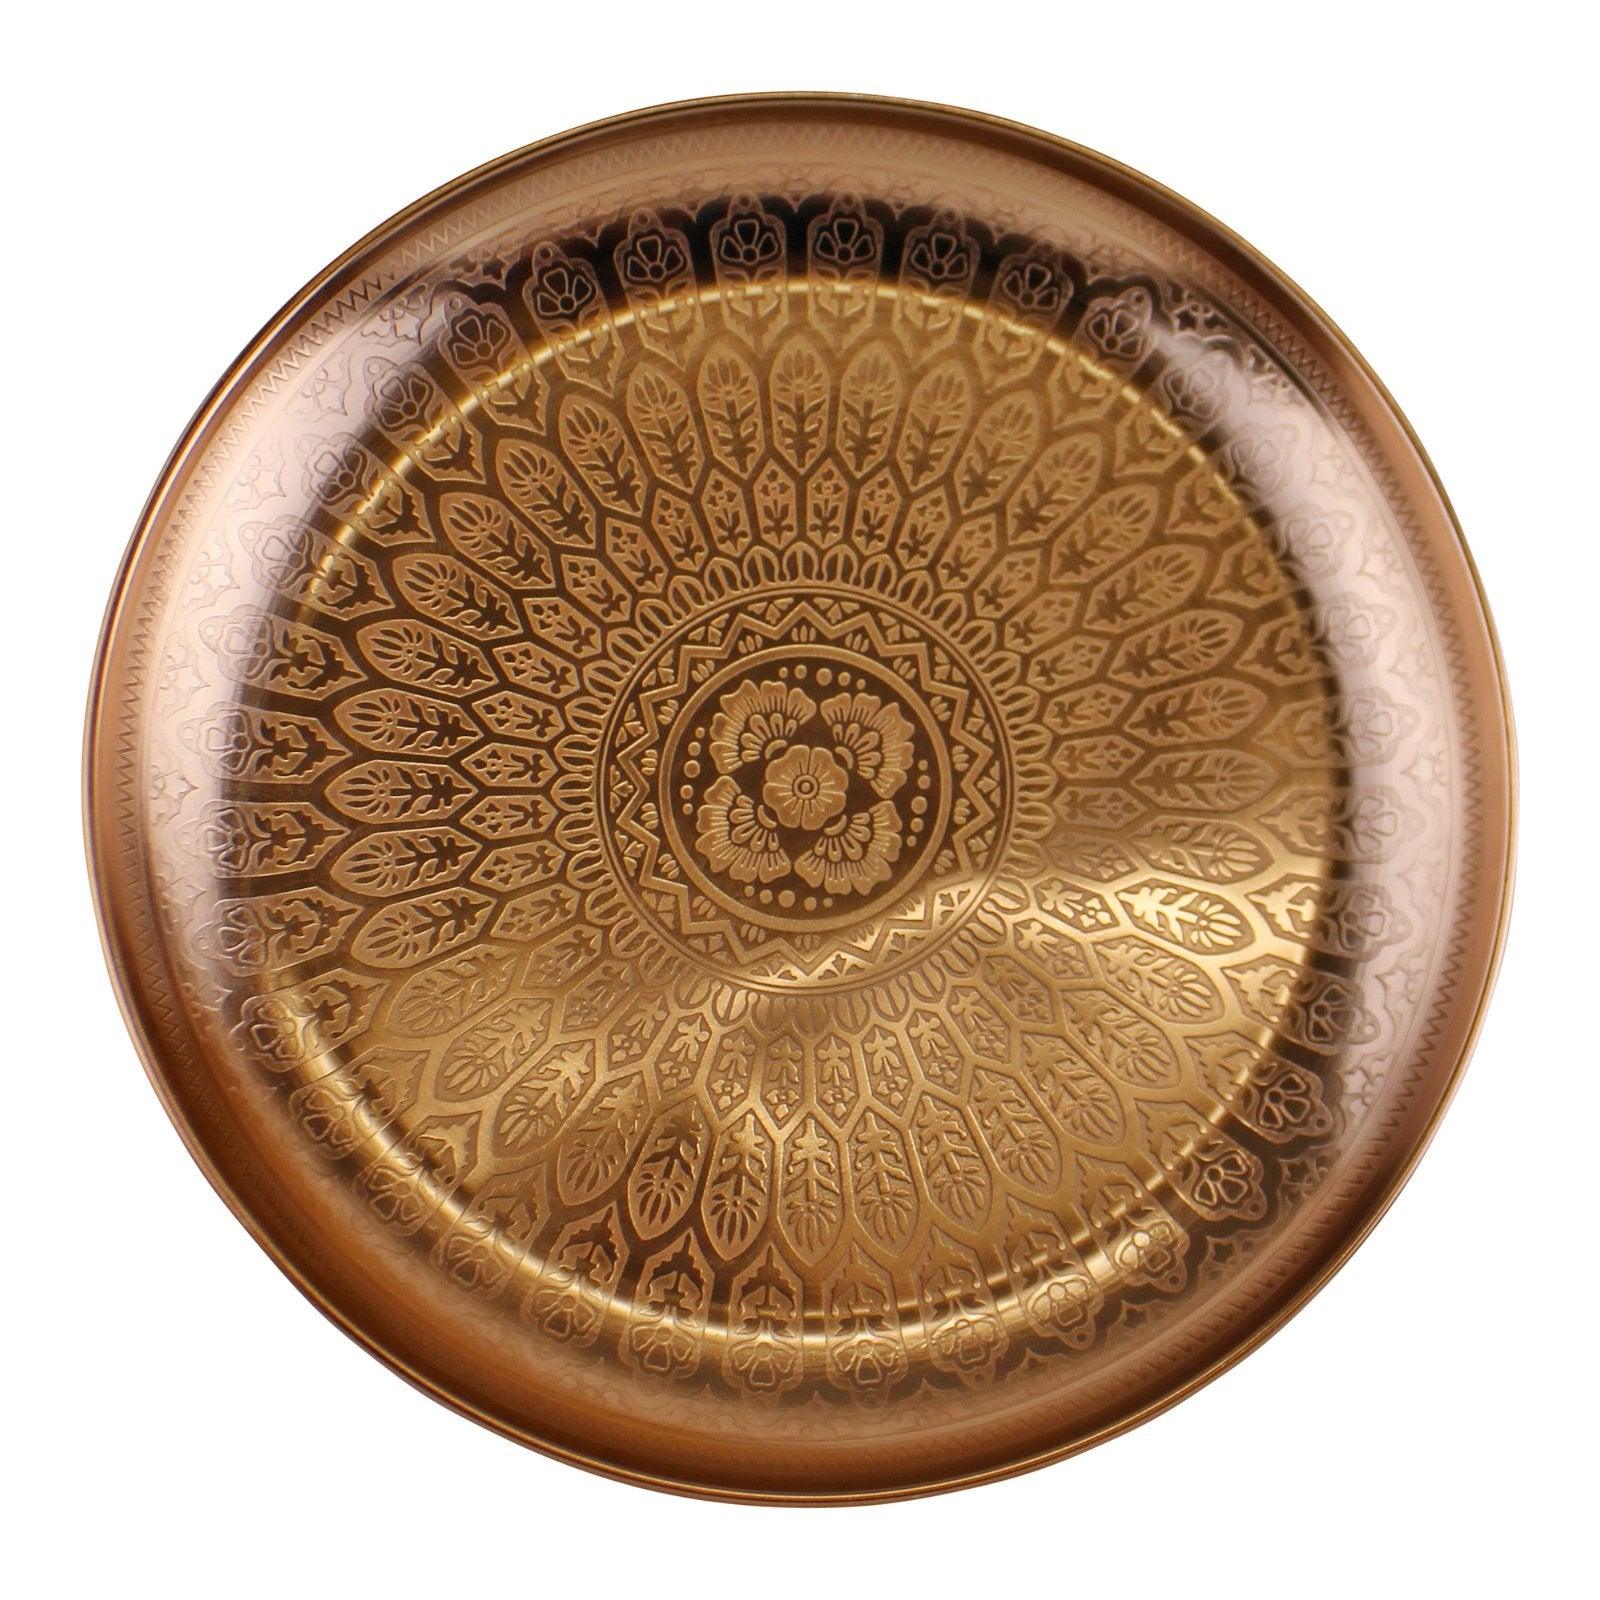 Decorative Copper Metal Tray With Etched Design-Bowls & Plates